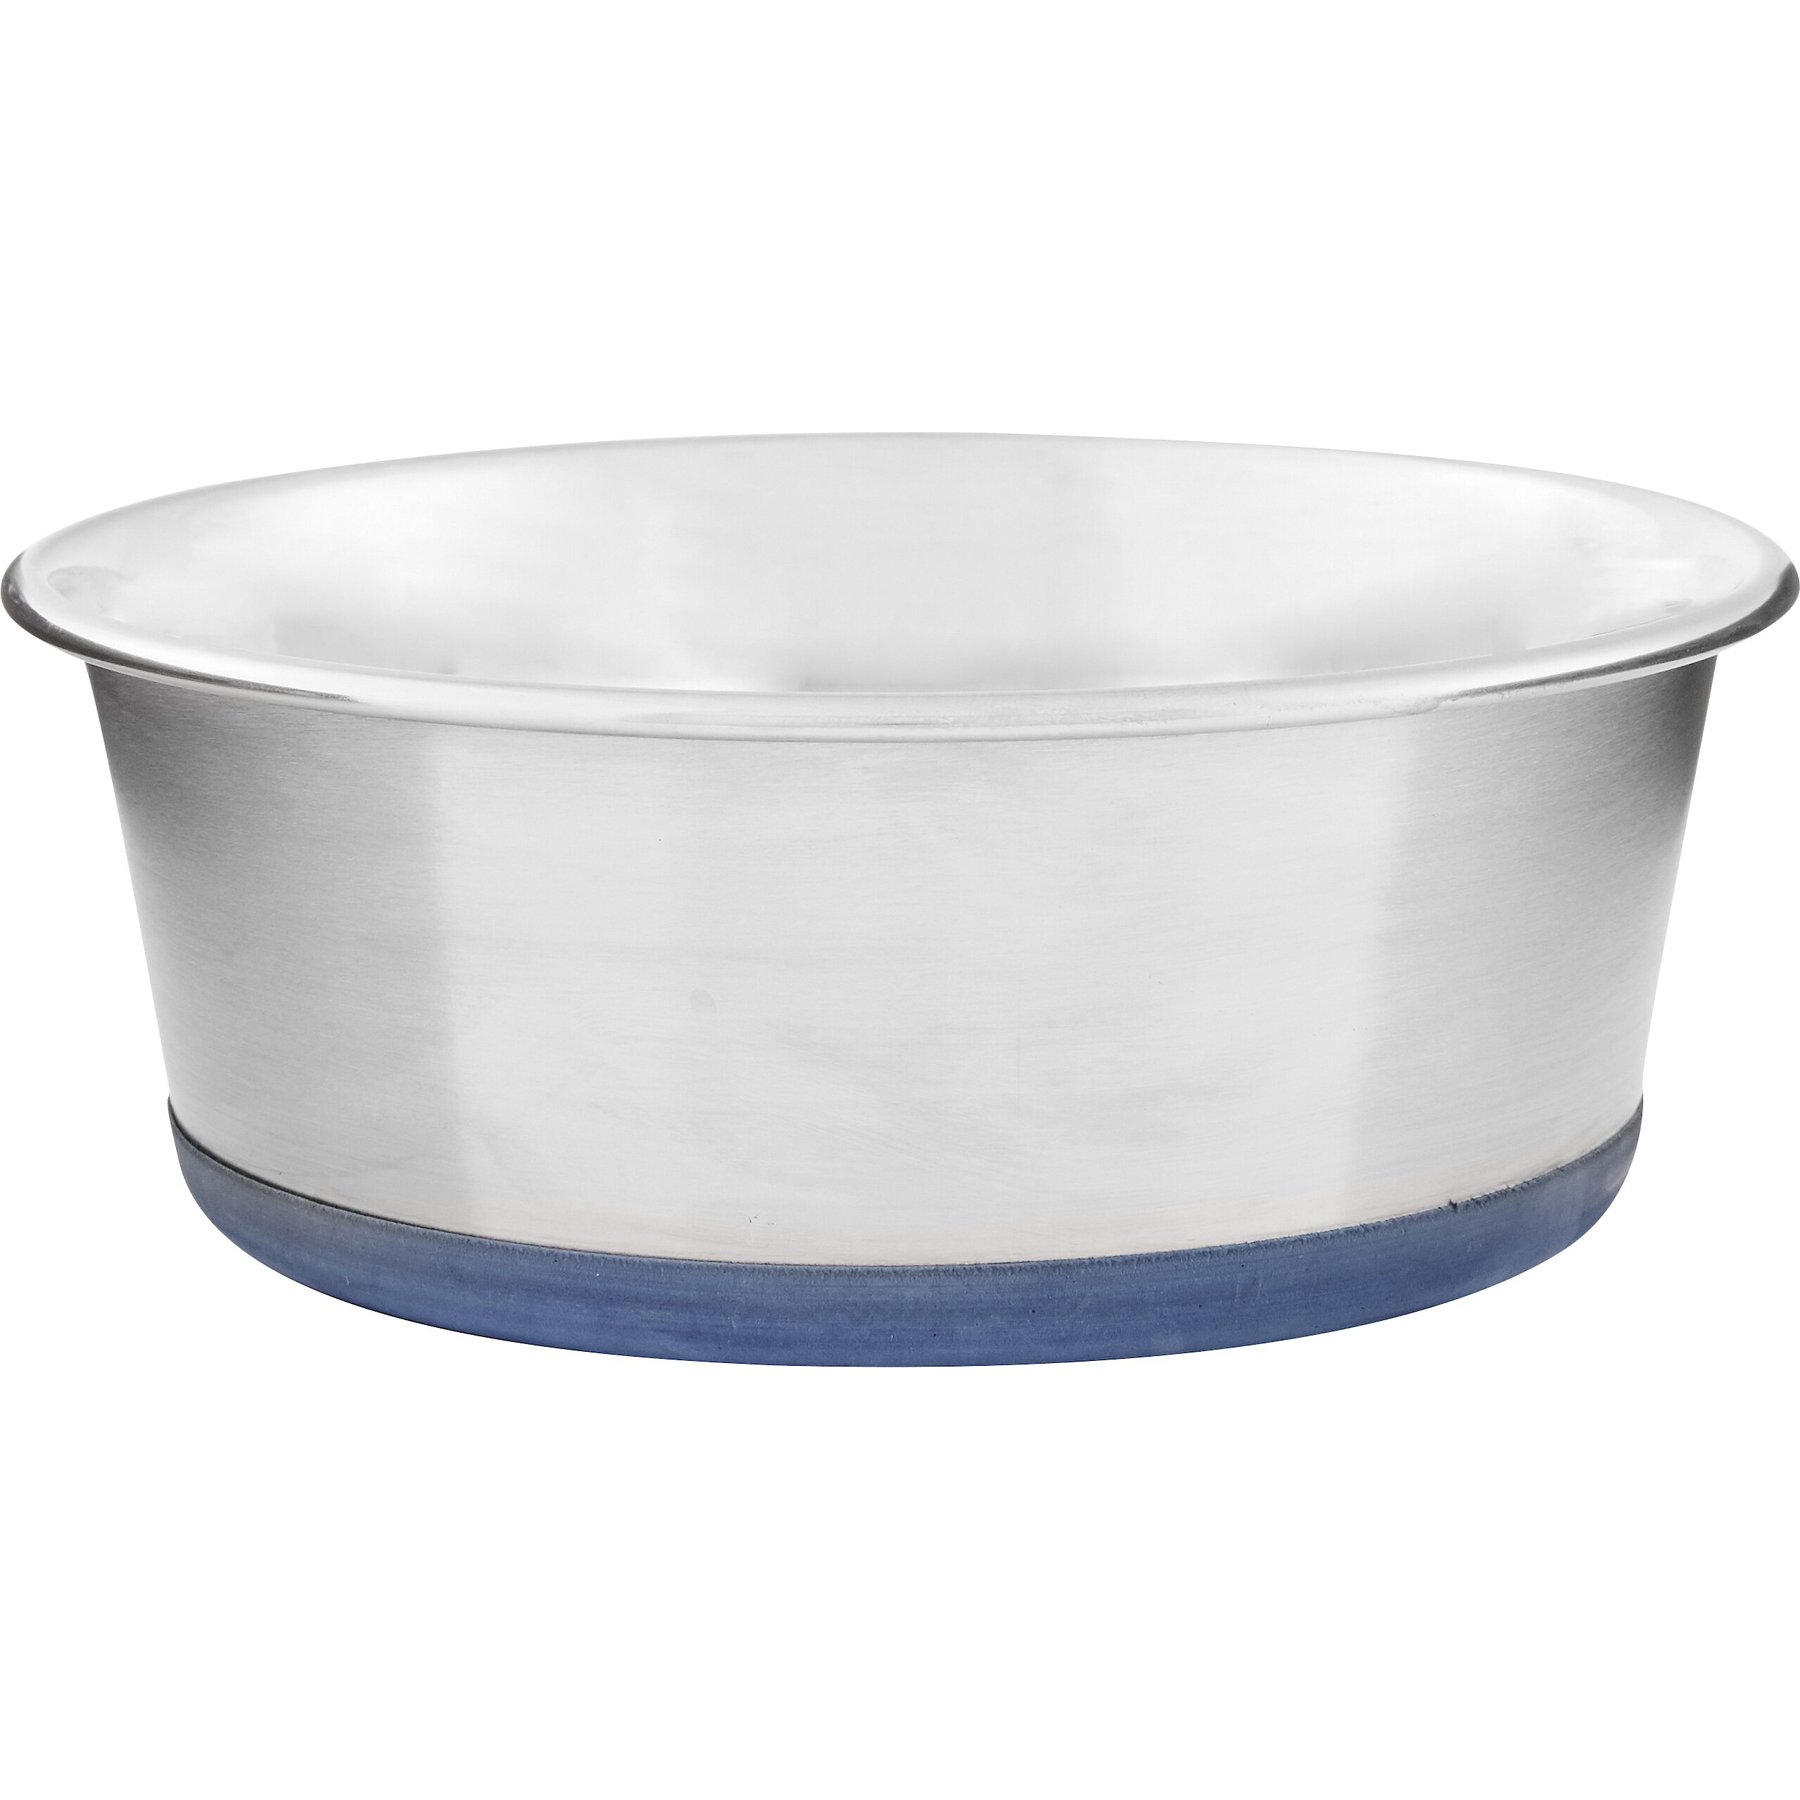 A.B Crew Stainless Steel Dog Bowl Set of 2, Non-Slip Rubber Base